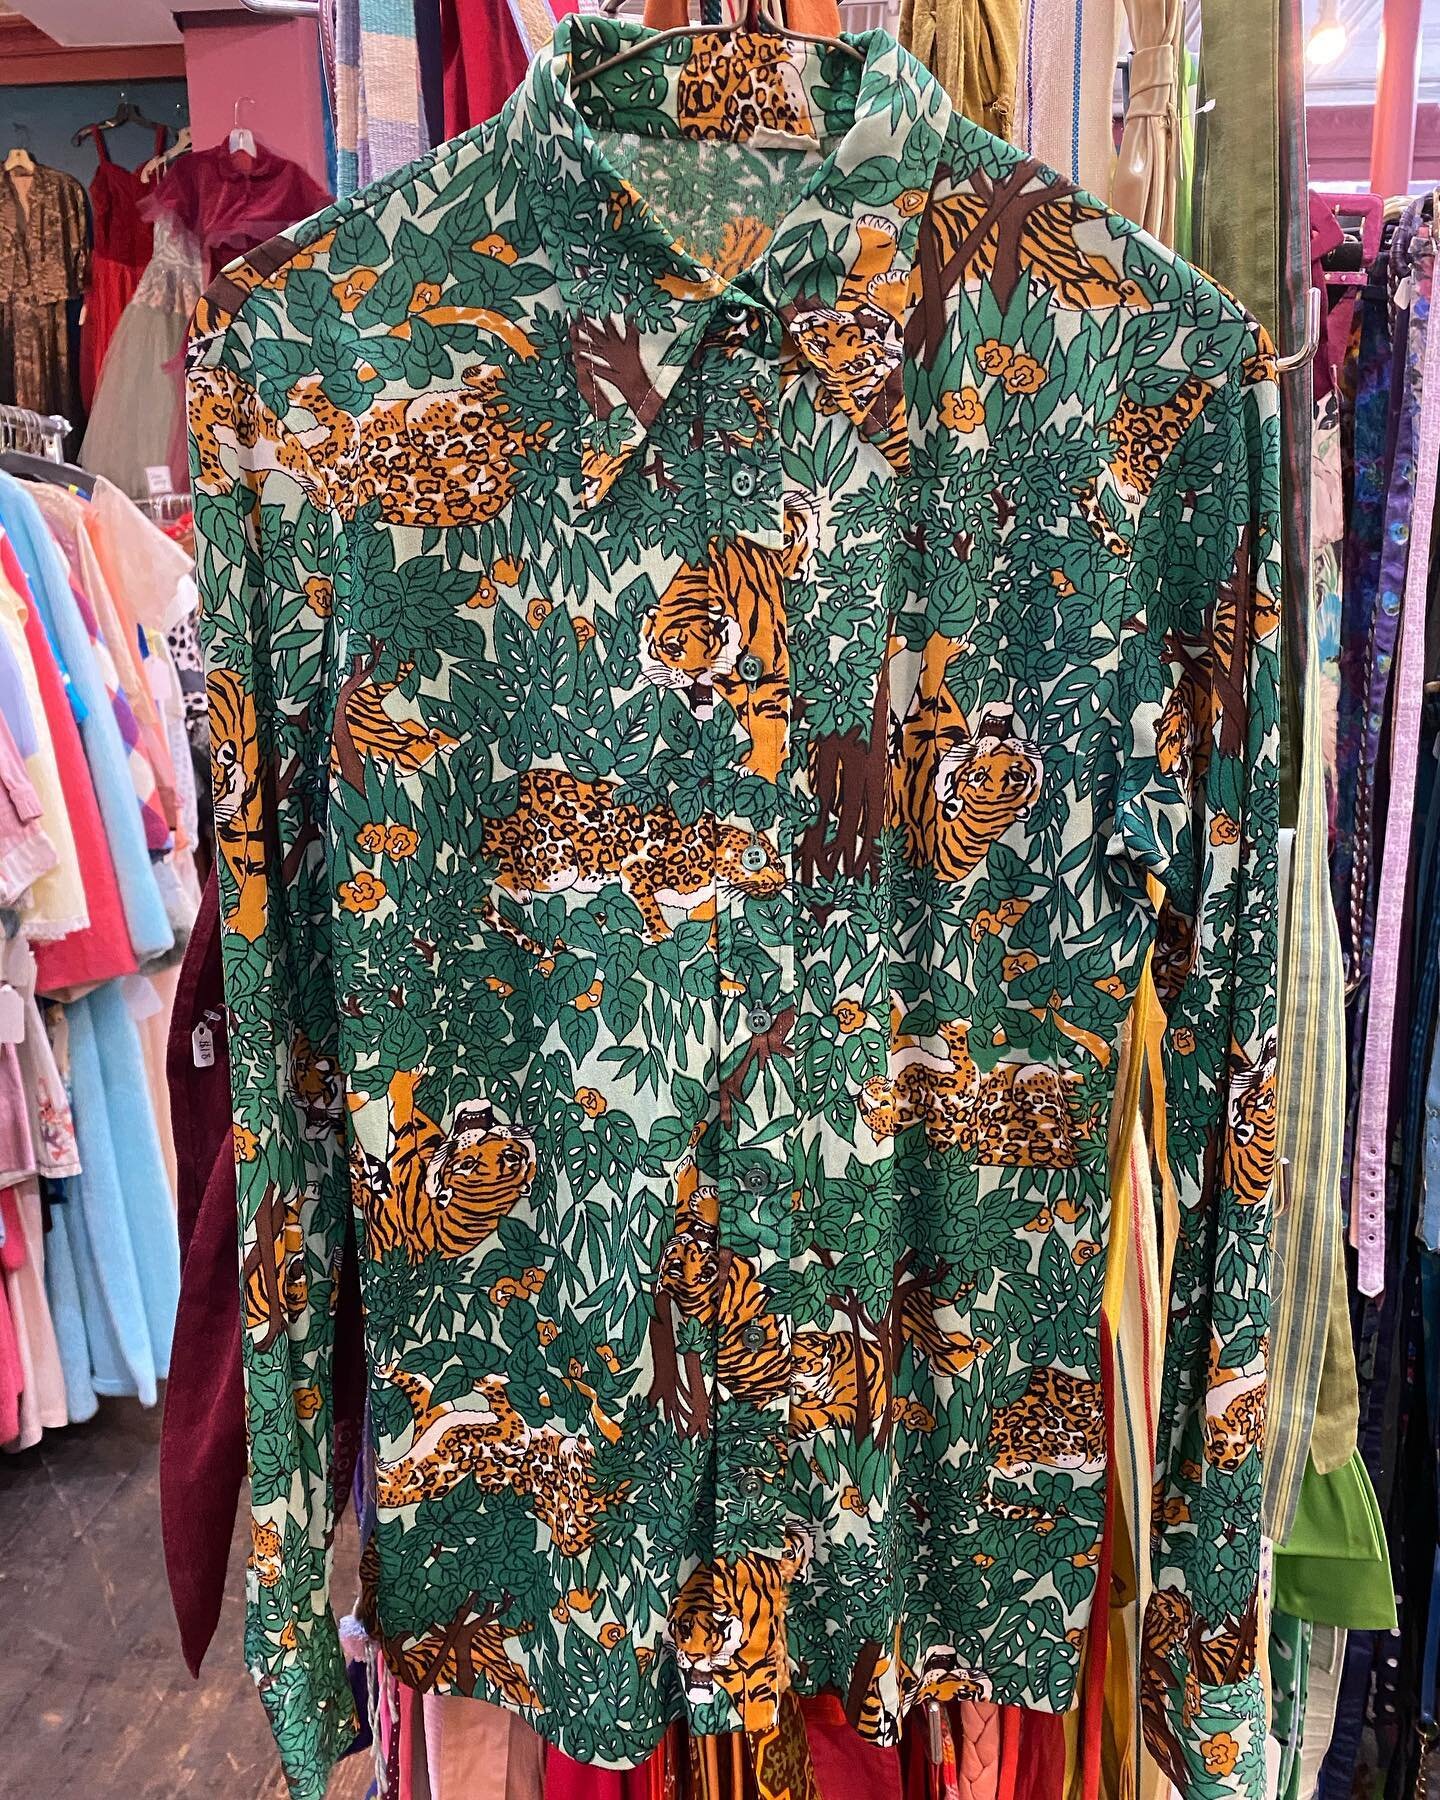 1970s disco shirt with jungle cats. &ldquo;In cooperation with WORLD WILDLIFE FUND! Women&rsquo;s S-M or men&rsquo;s XS/S. $48 DM to purchase!! #wwf #vintageforsale #vintage #discoshirt #cats #jungle #worldwildlifefund #70sstyle